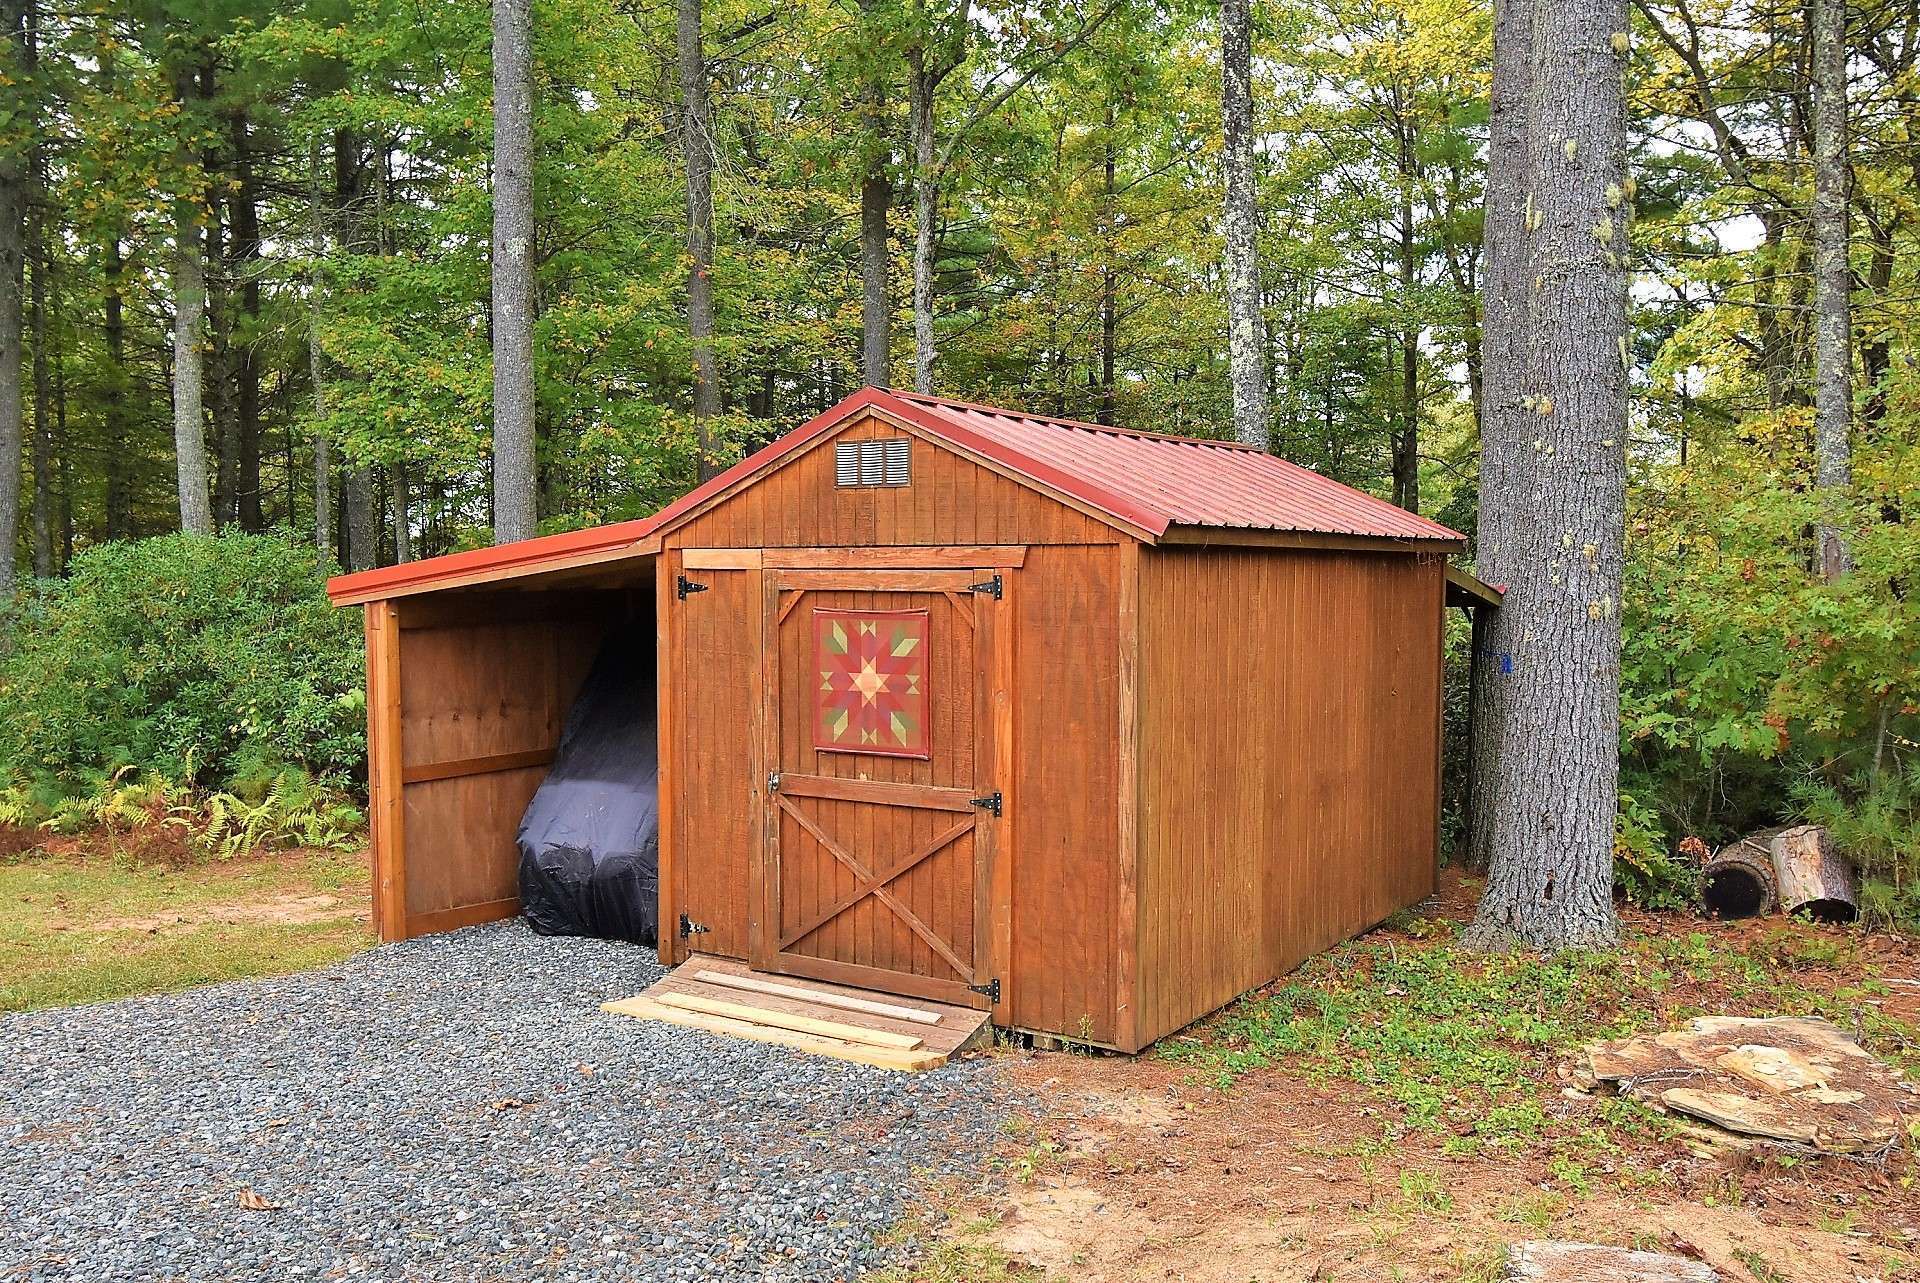 Also included is this 8' x 12' outbuilding, wired with electricity, for storing your lawn and gardening equipment.